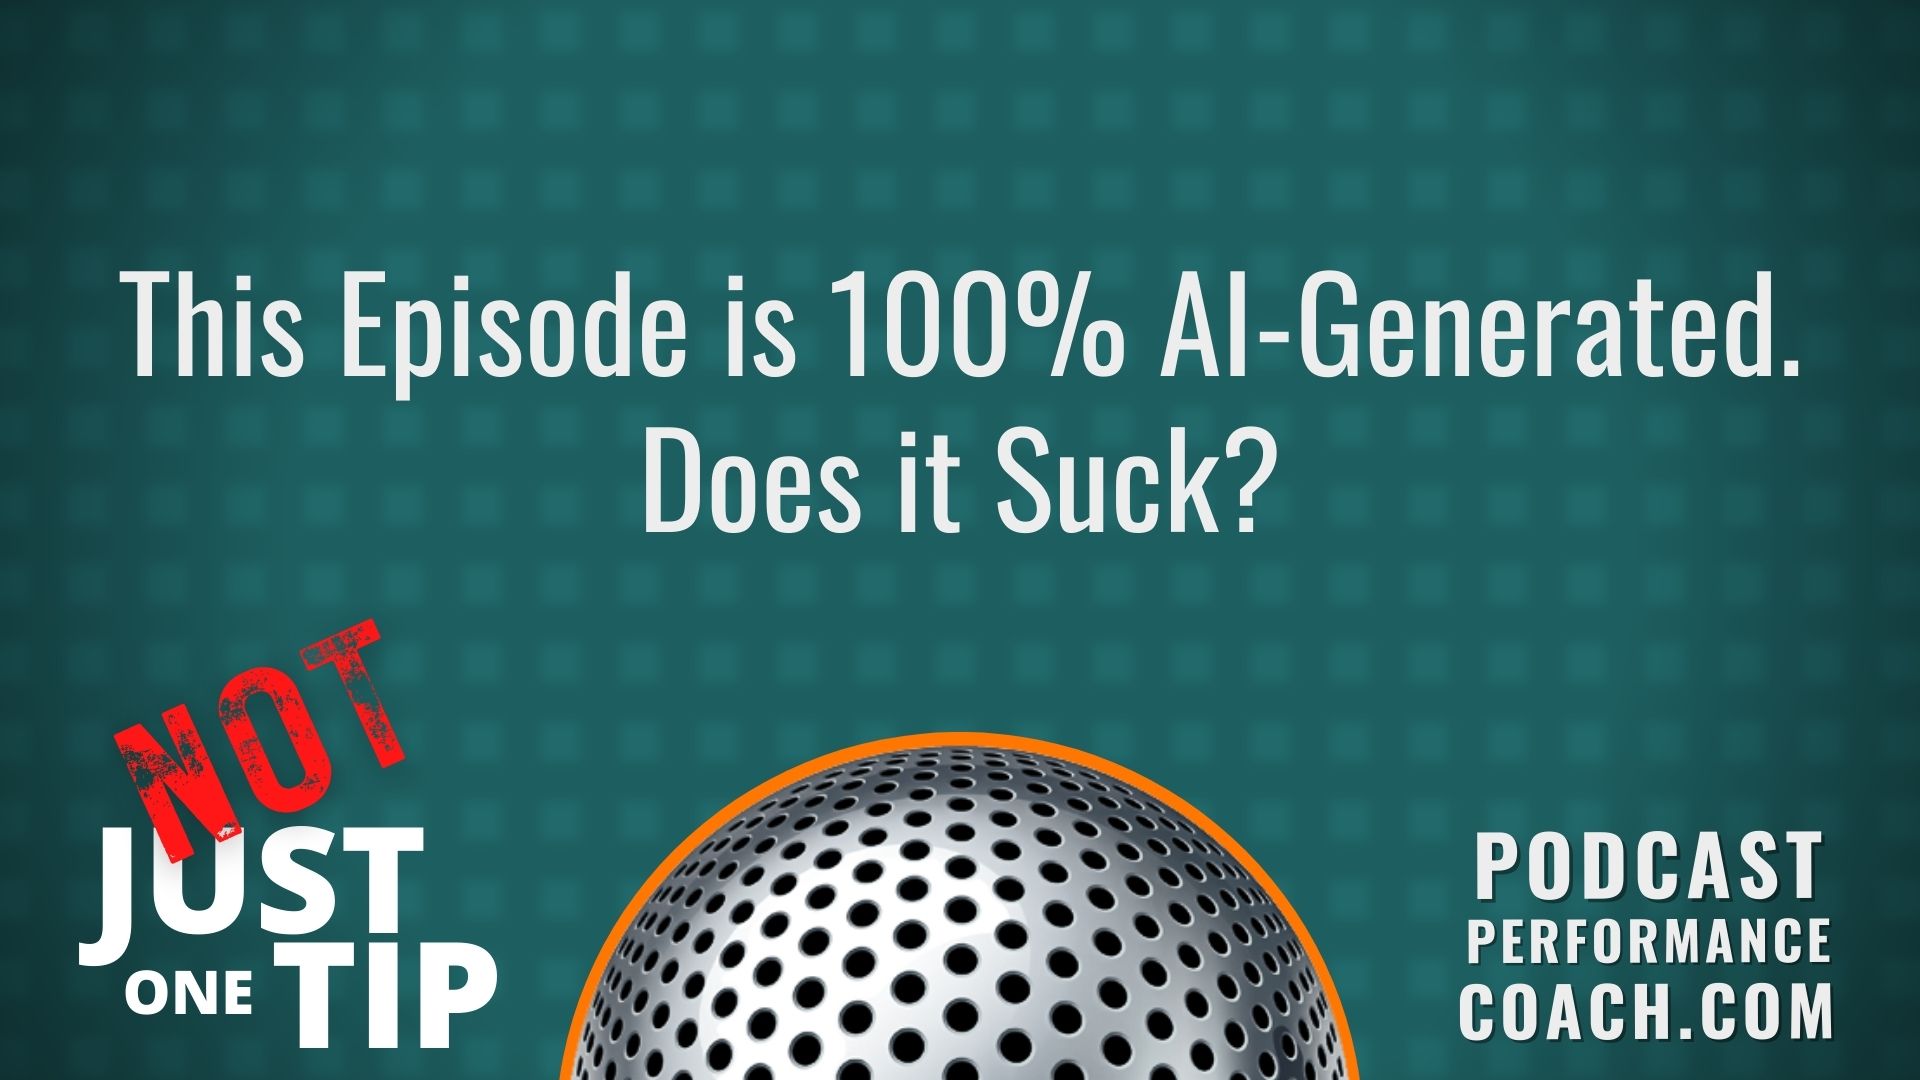 This Podcast Episode is 100% AI-Generated. Does it Suck?